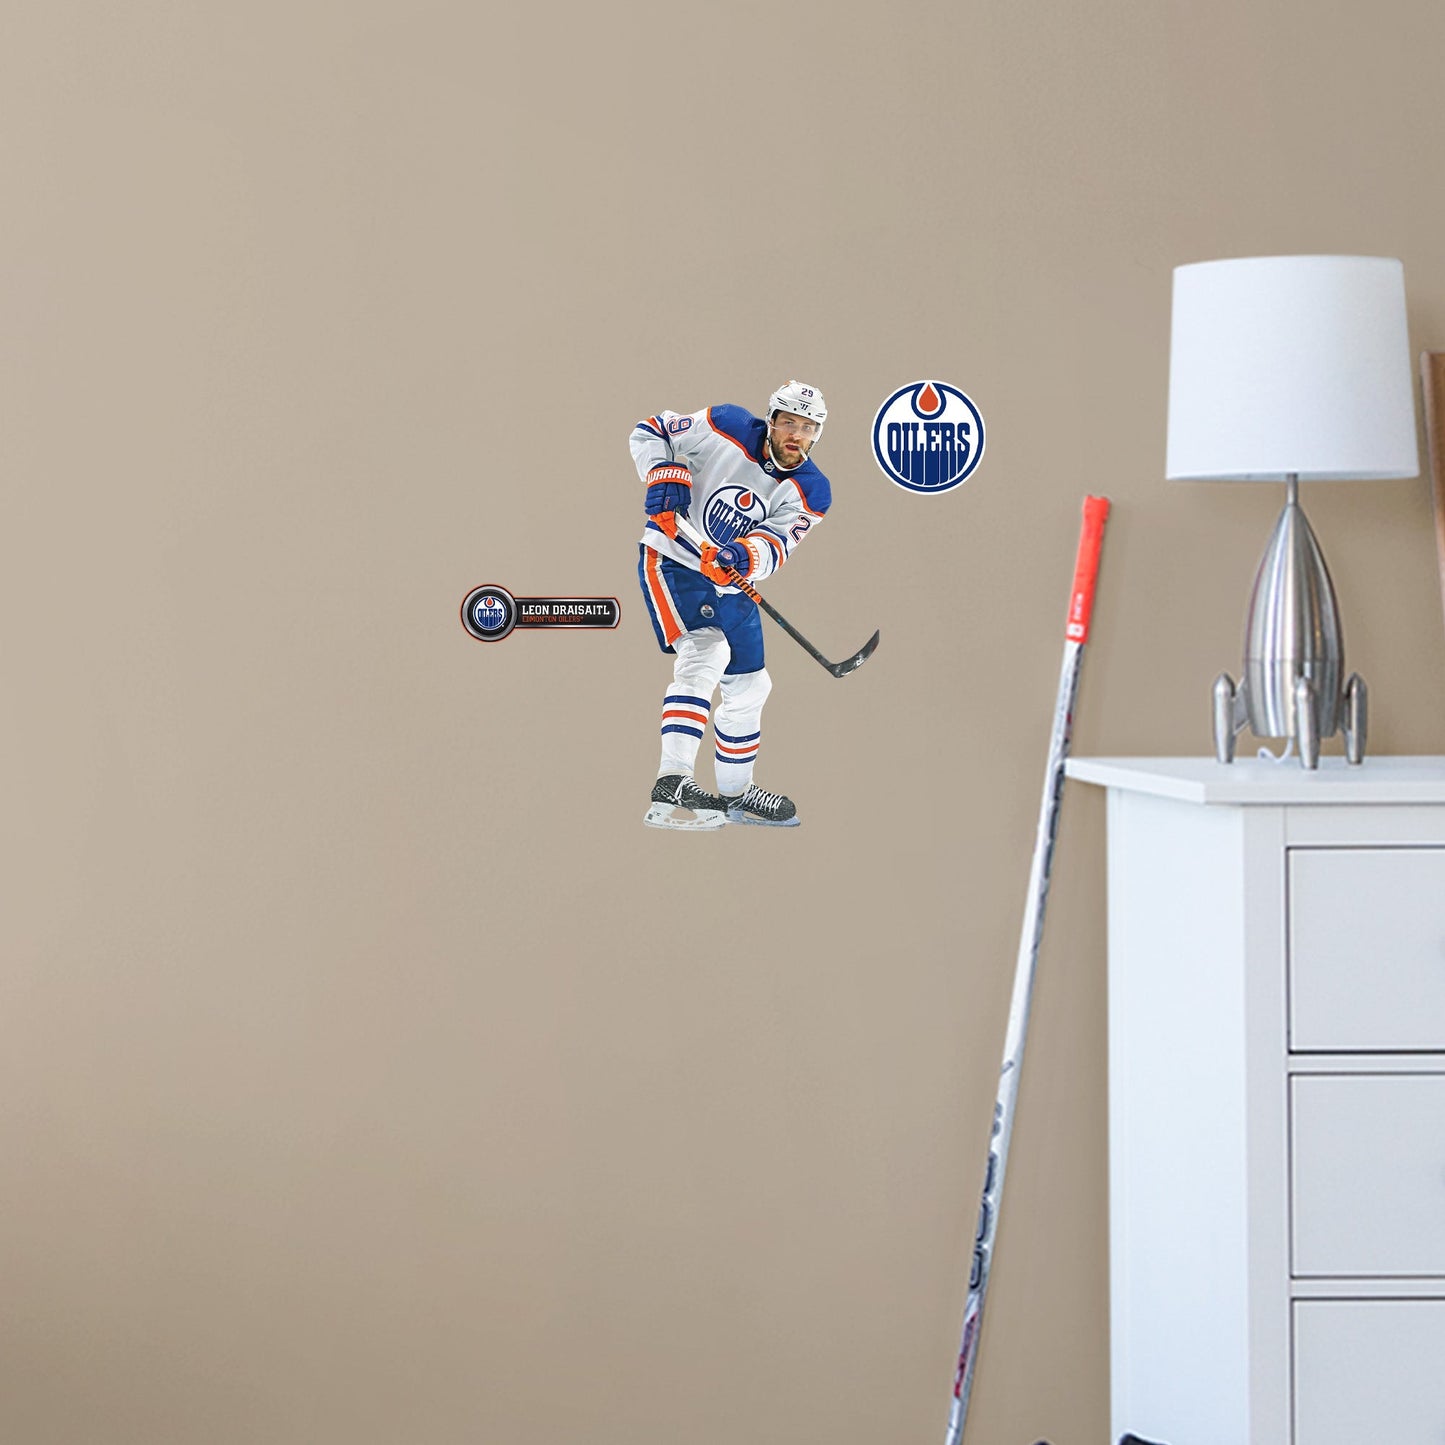 Edmonton Oilers: Leon Draisaitl - Officially Licensed NHL Removable Adhesive Decal